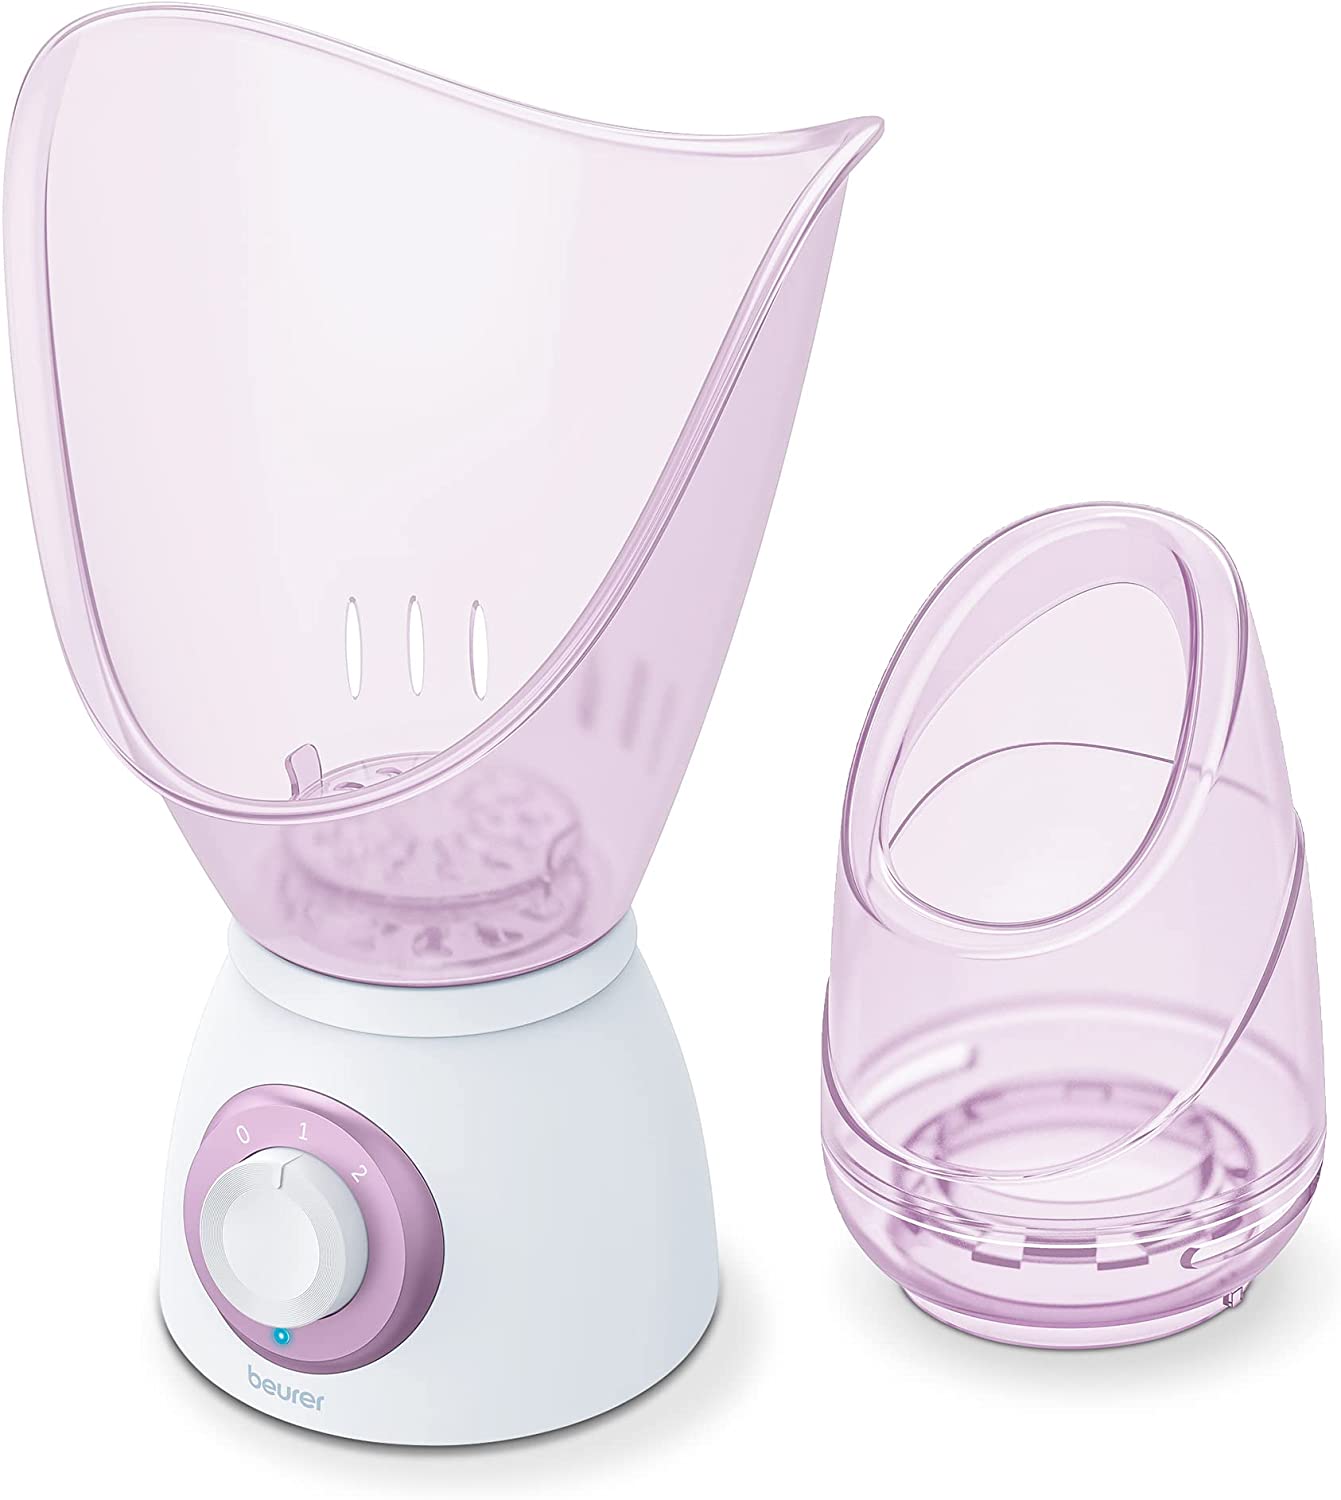 Beurer FS 60 Facial Sauna - Facial Steamer for Cosmetic Facial Care - Opens Pores and Moisturises - Soothing Steam - Also Suitable for Aromatherapy and Inhalation